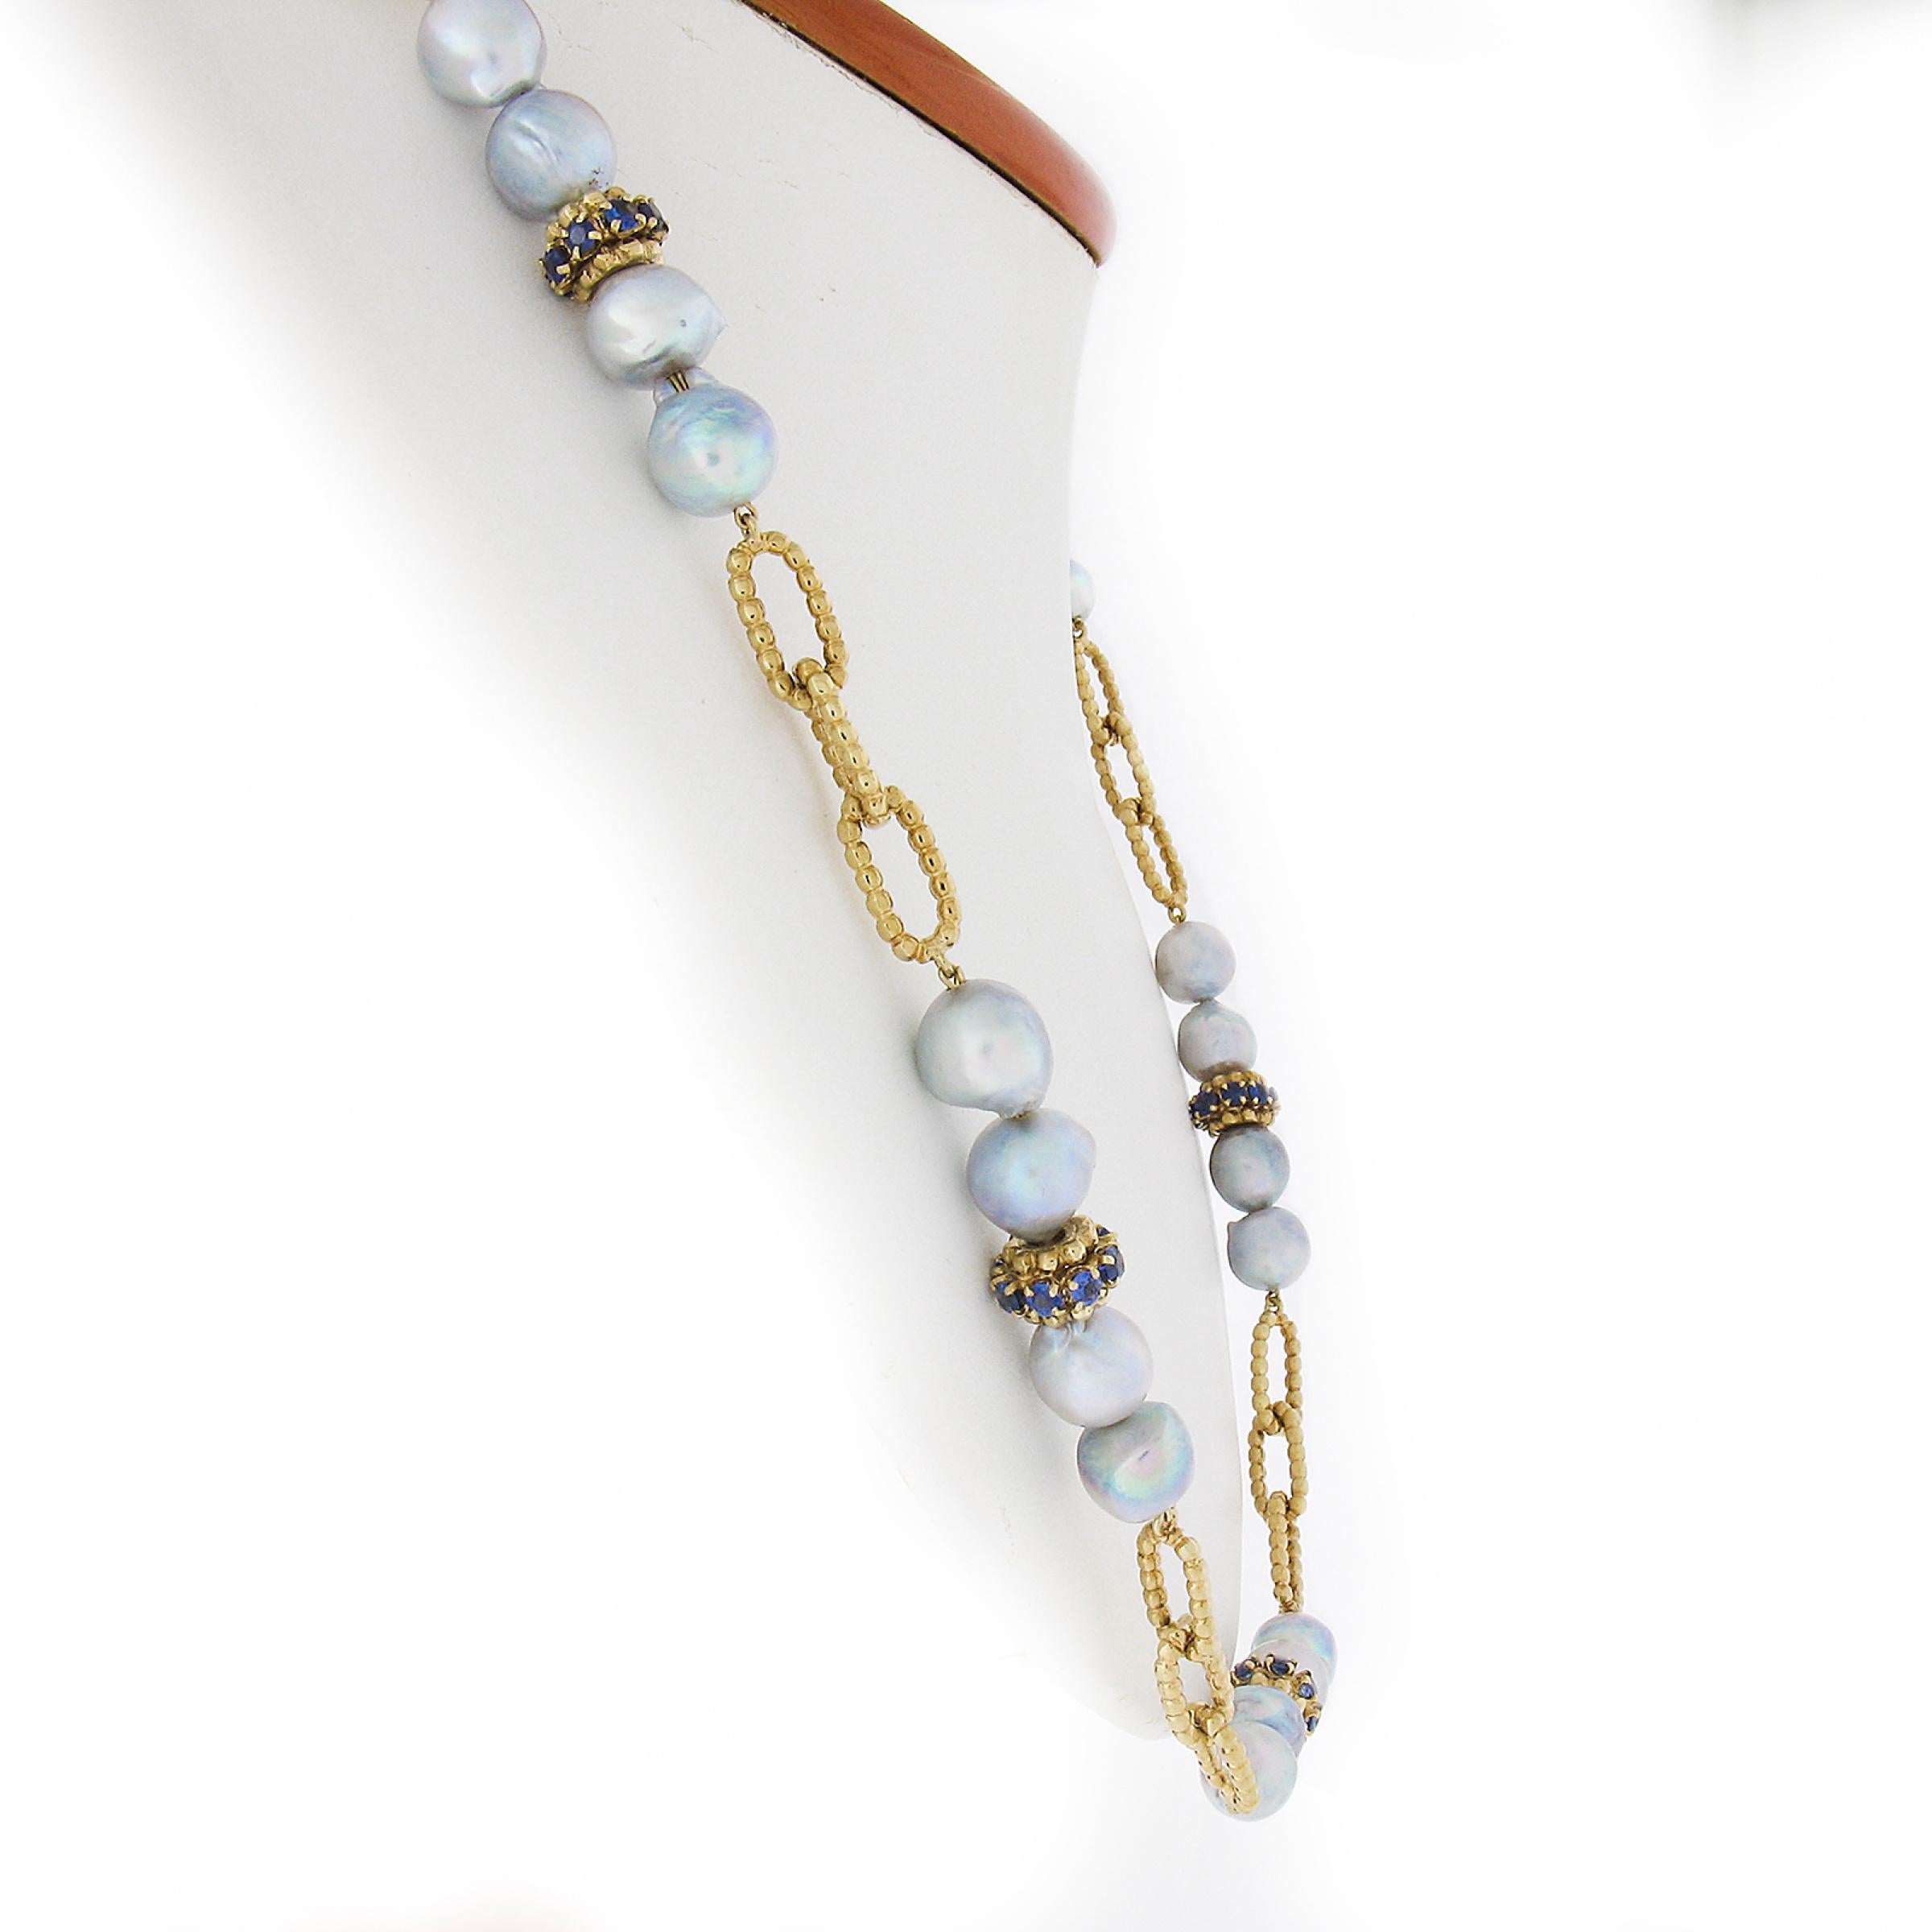 --Stone(s):--
(28) Natural Cultured Pearls - Baroque Shape - Wire Strung - Silvery Gray Color w/ Green overtone- 8-10.1mm (approx.)
(56) Natural Genuine Sapphires - Round Brilliant Cut - Prong Set - Blue Color - 5-6ctw (approx.)
Total Carat